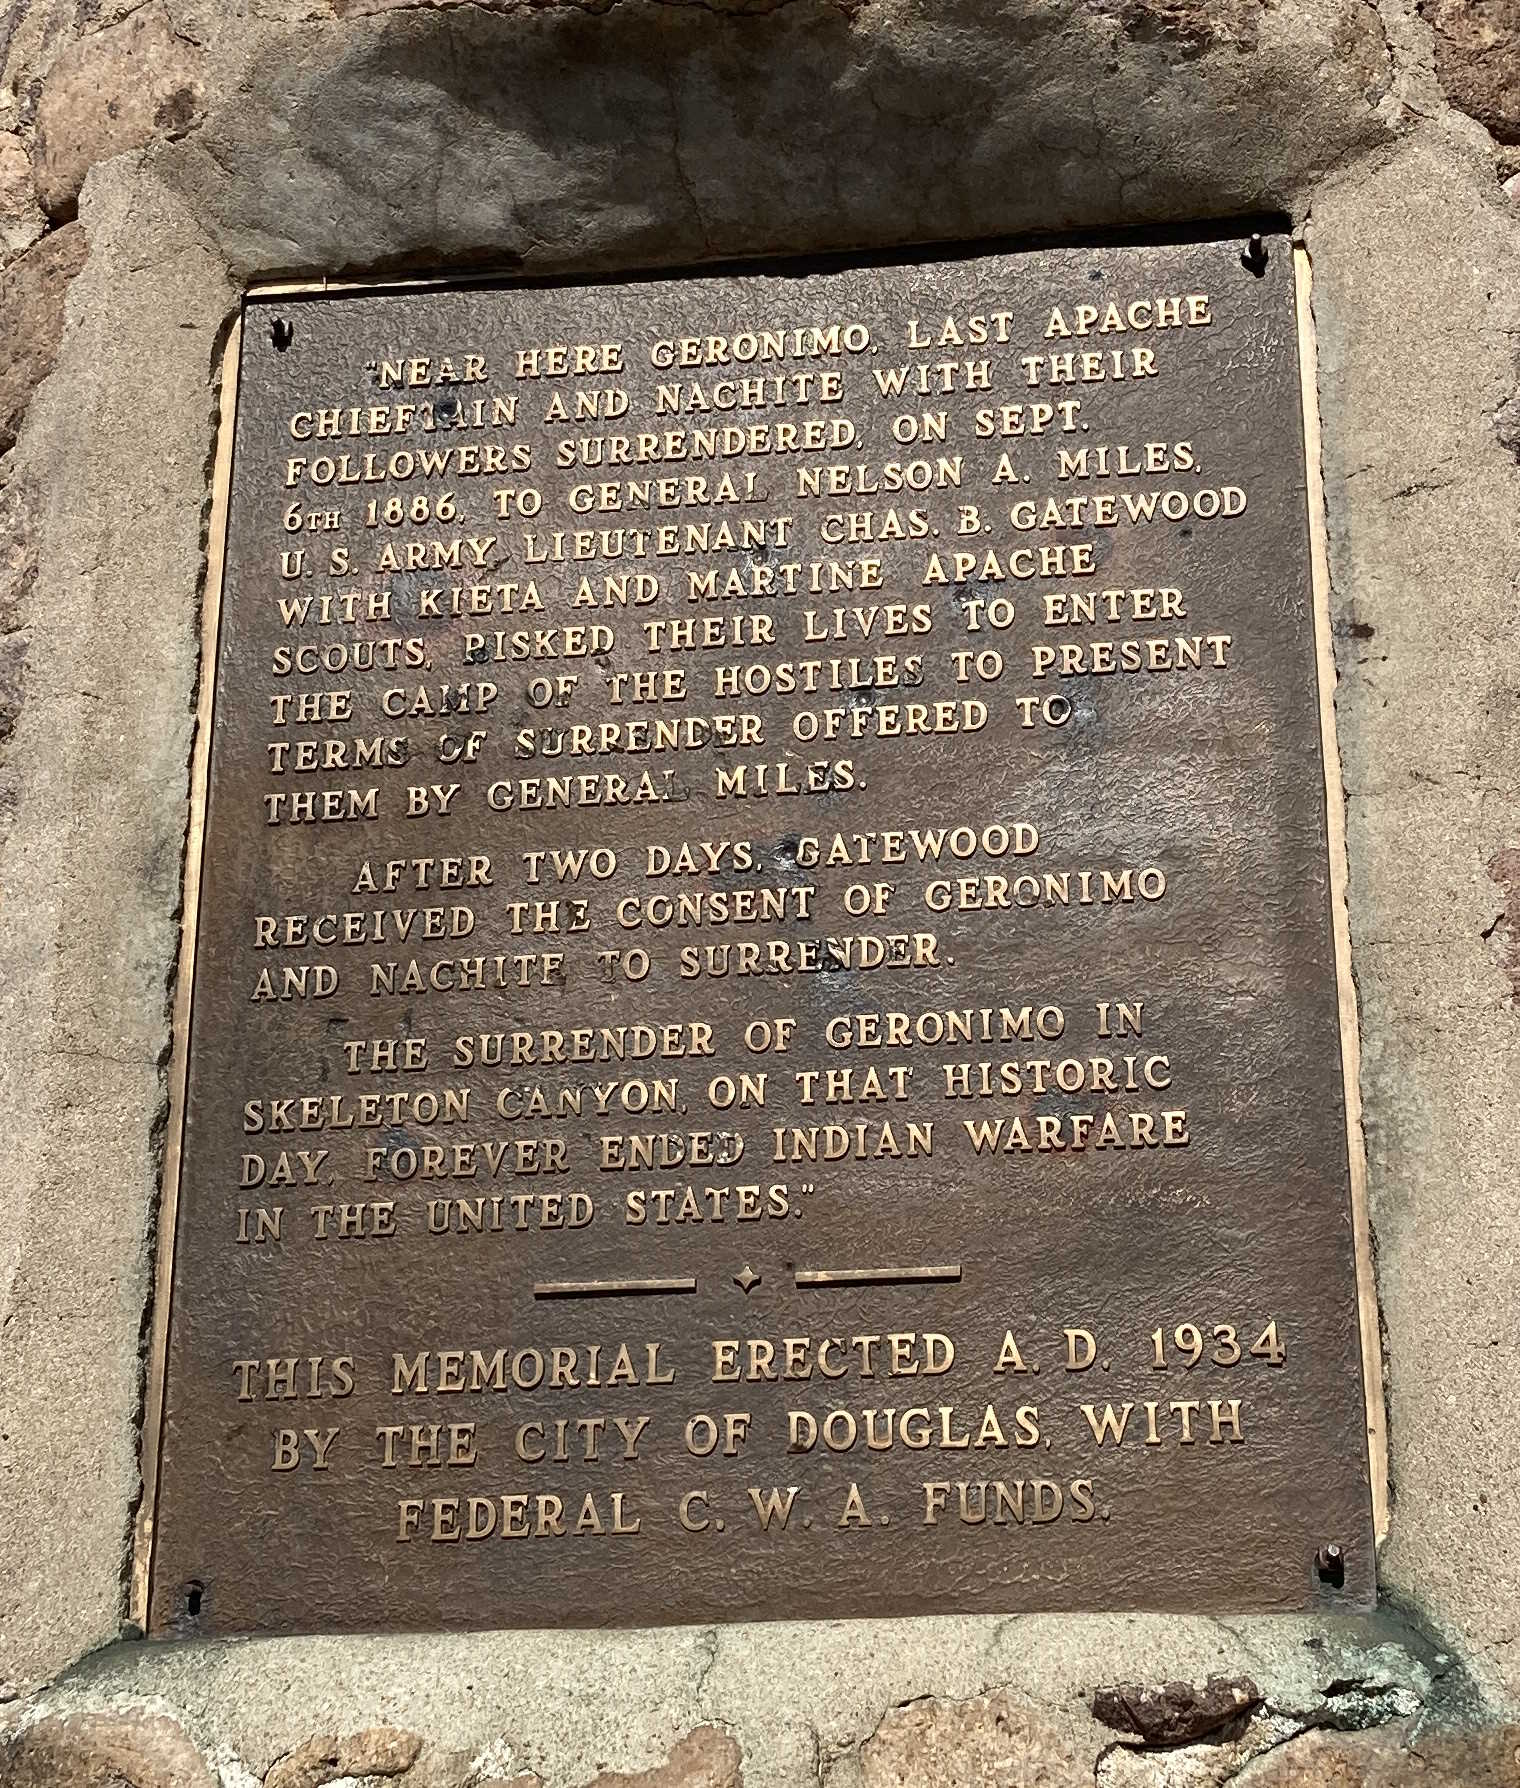 Placard on the Monument to Geronimo's surrender